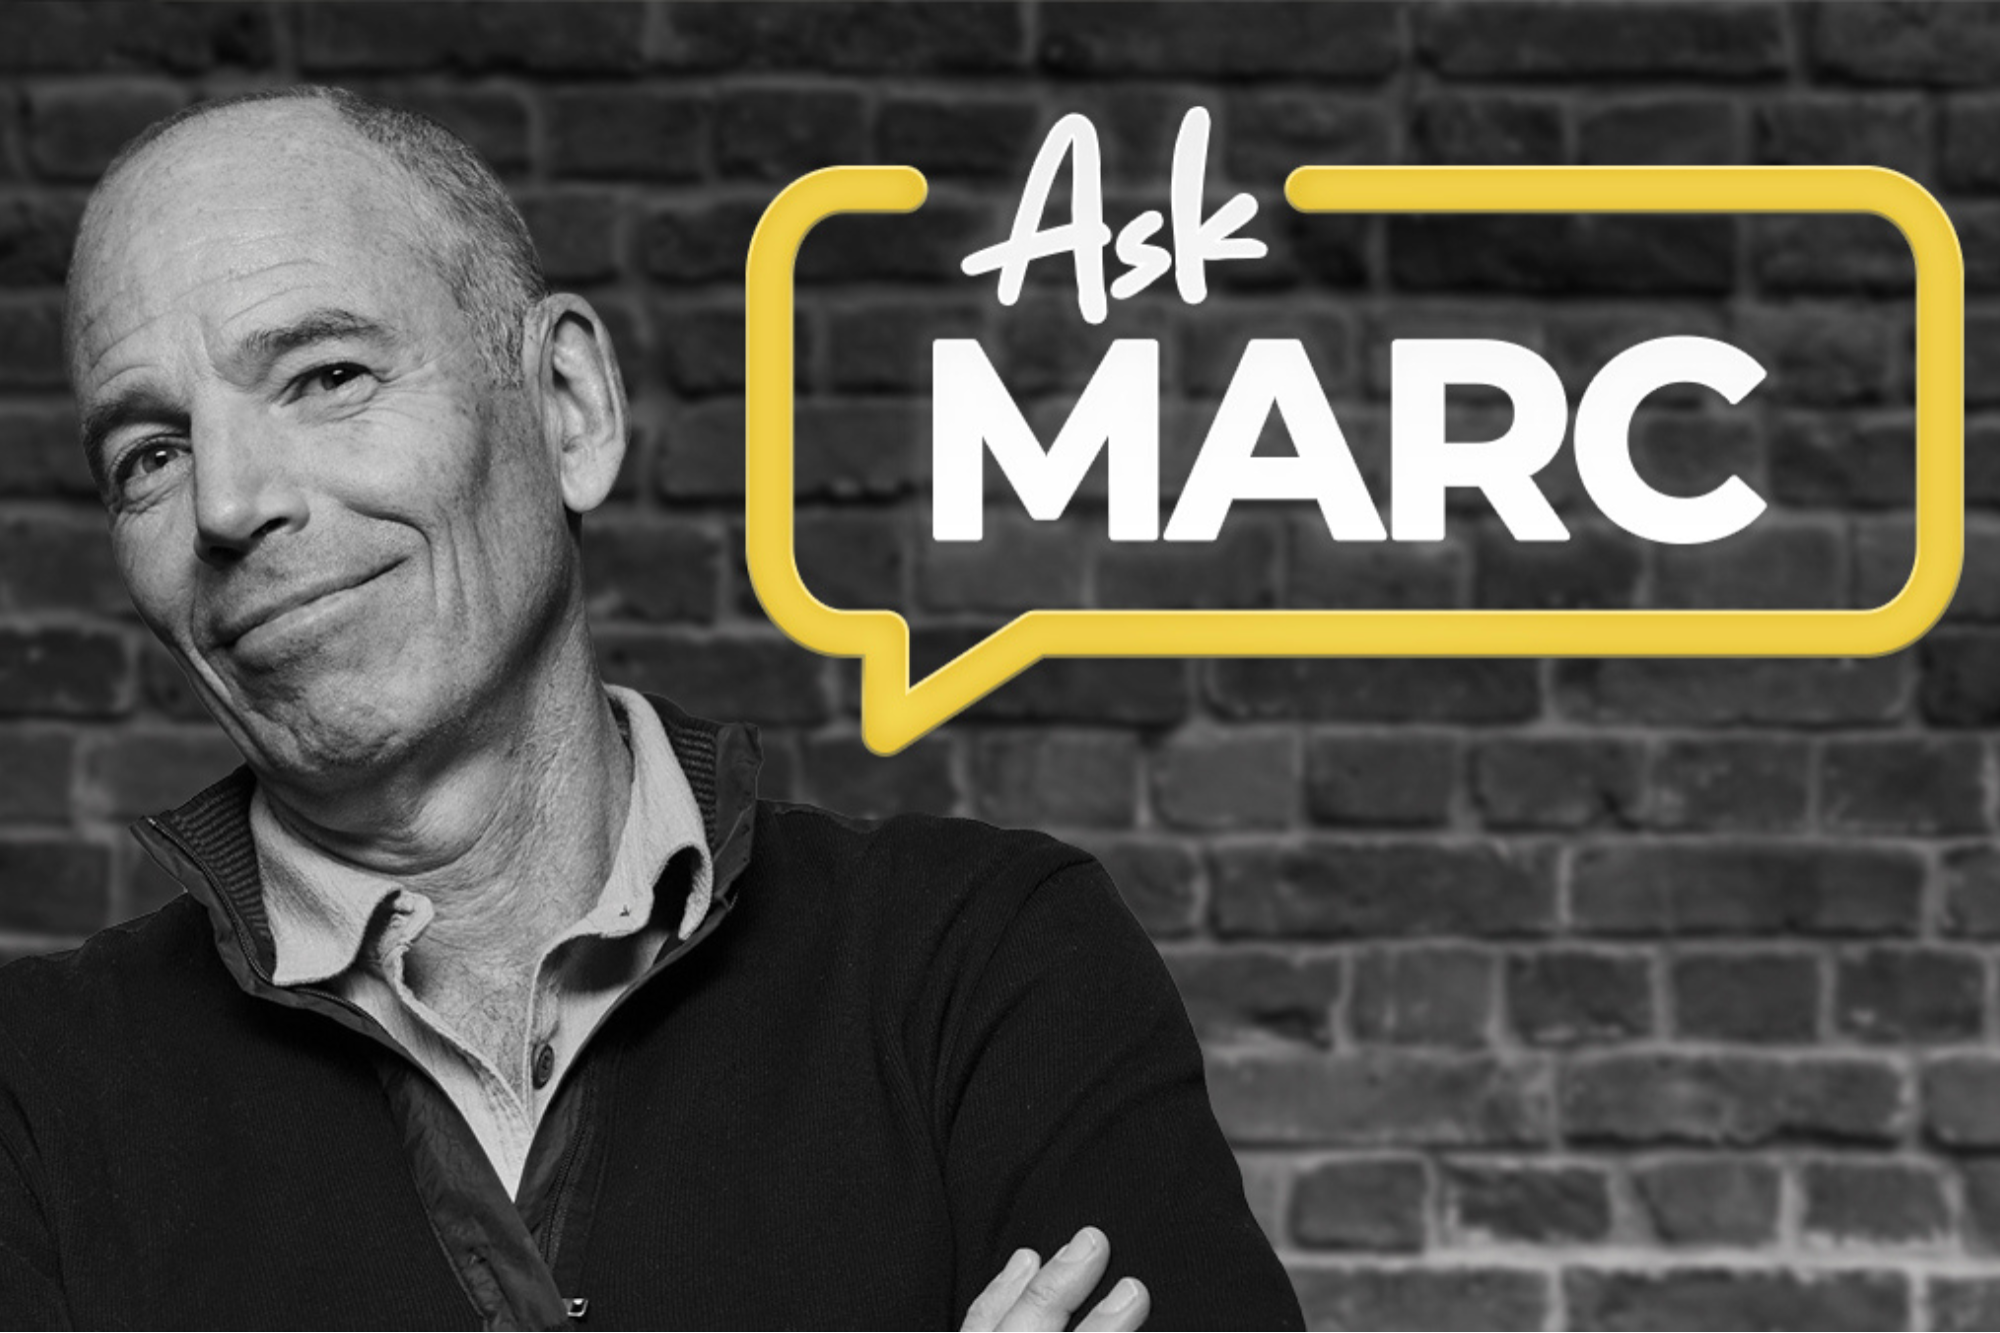 Ask Marc | Free Business Advice Session with the Co-Founder of Netflix